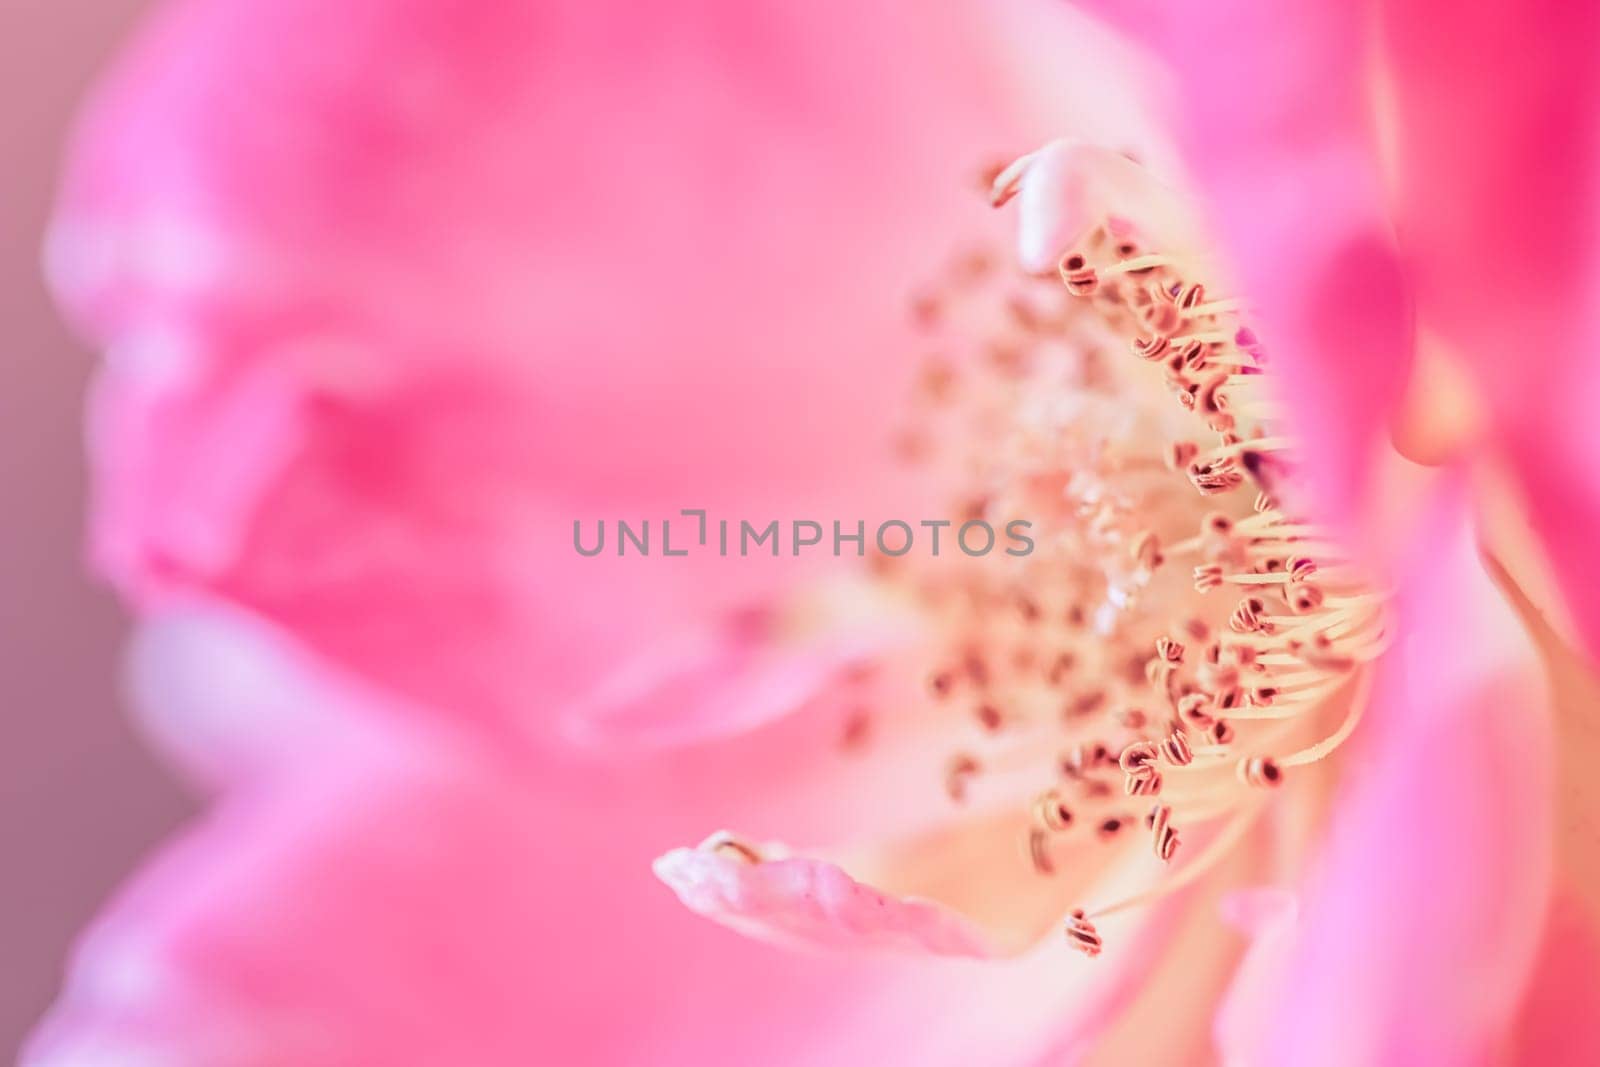 Pink rose with stamens and pistil. Macro flowers background by Olayola